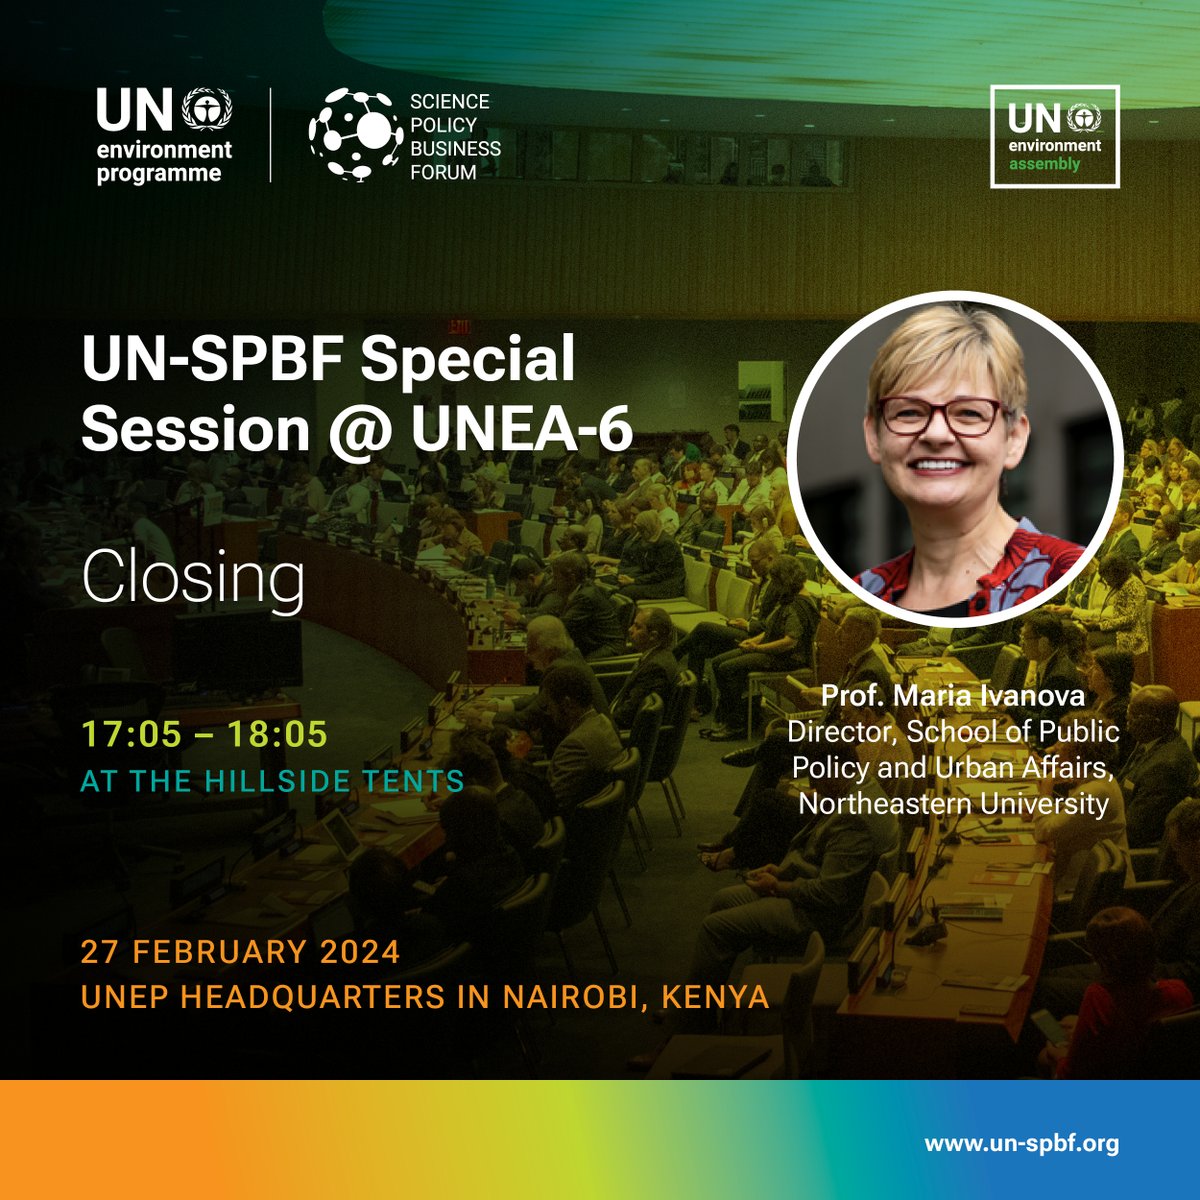 Speakers are sharing actionable big ideas at our closing session: Maria Ivanova shares her vision of an '#art and #academia alliance to connect hearts and minds, North and South, East and West, Humans, and Nature. Art tickles our imagination and points to social issues.' #UNEA6